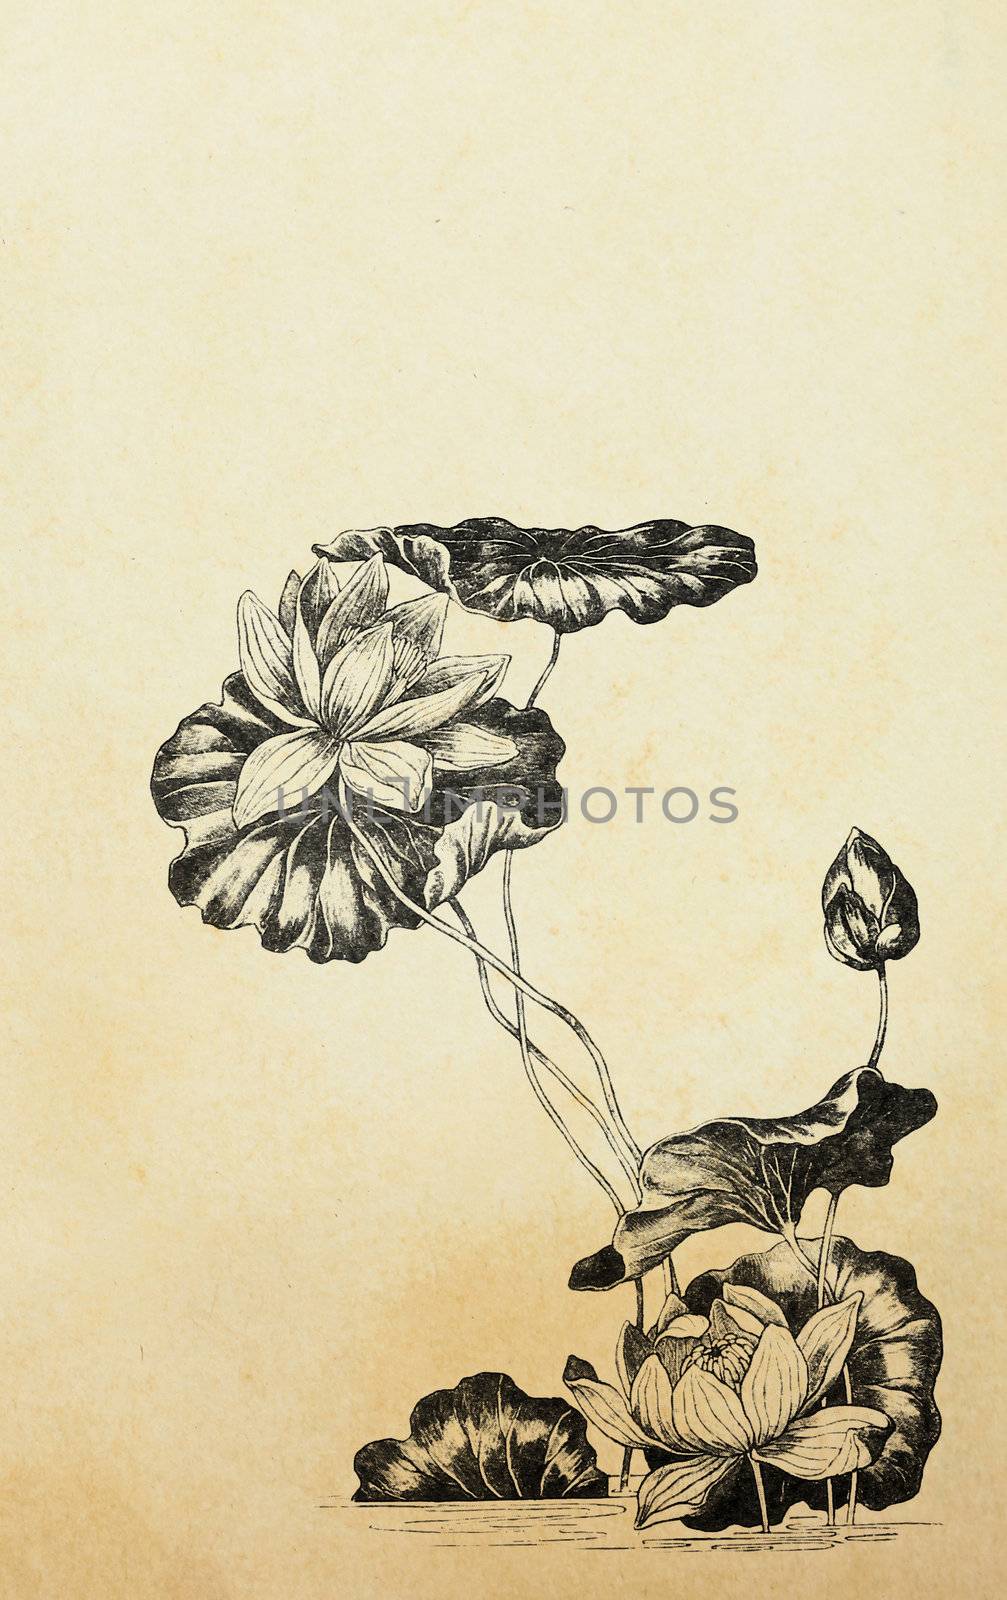 Lotus flowers in art nouveau style on old paper by nuchylee